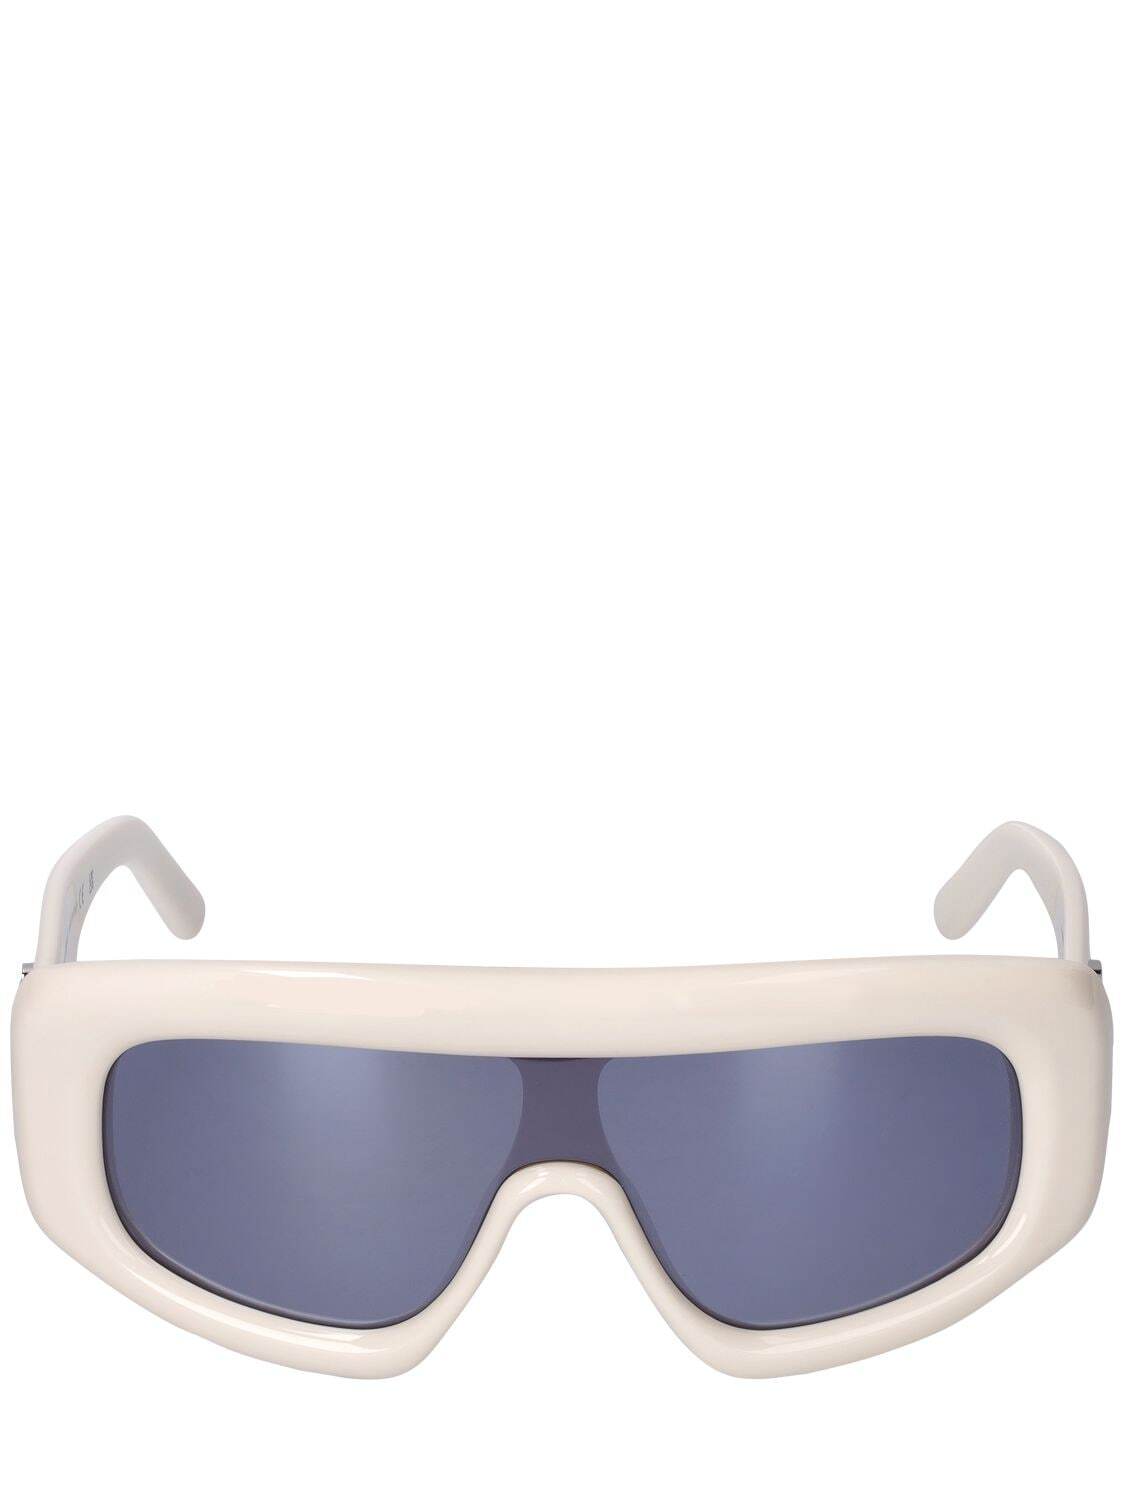 PALM ANGELS Carmel Mask Acetate Sunglasses in silver / white